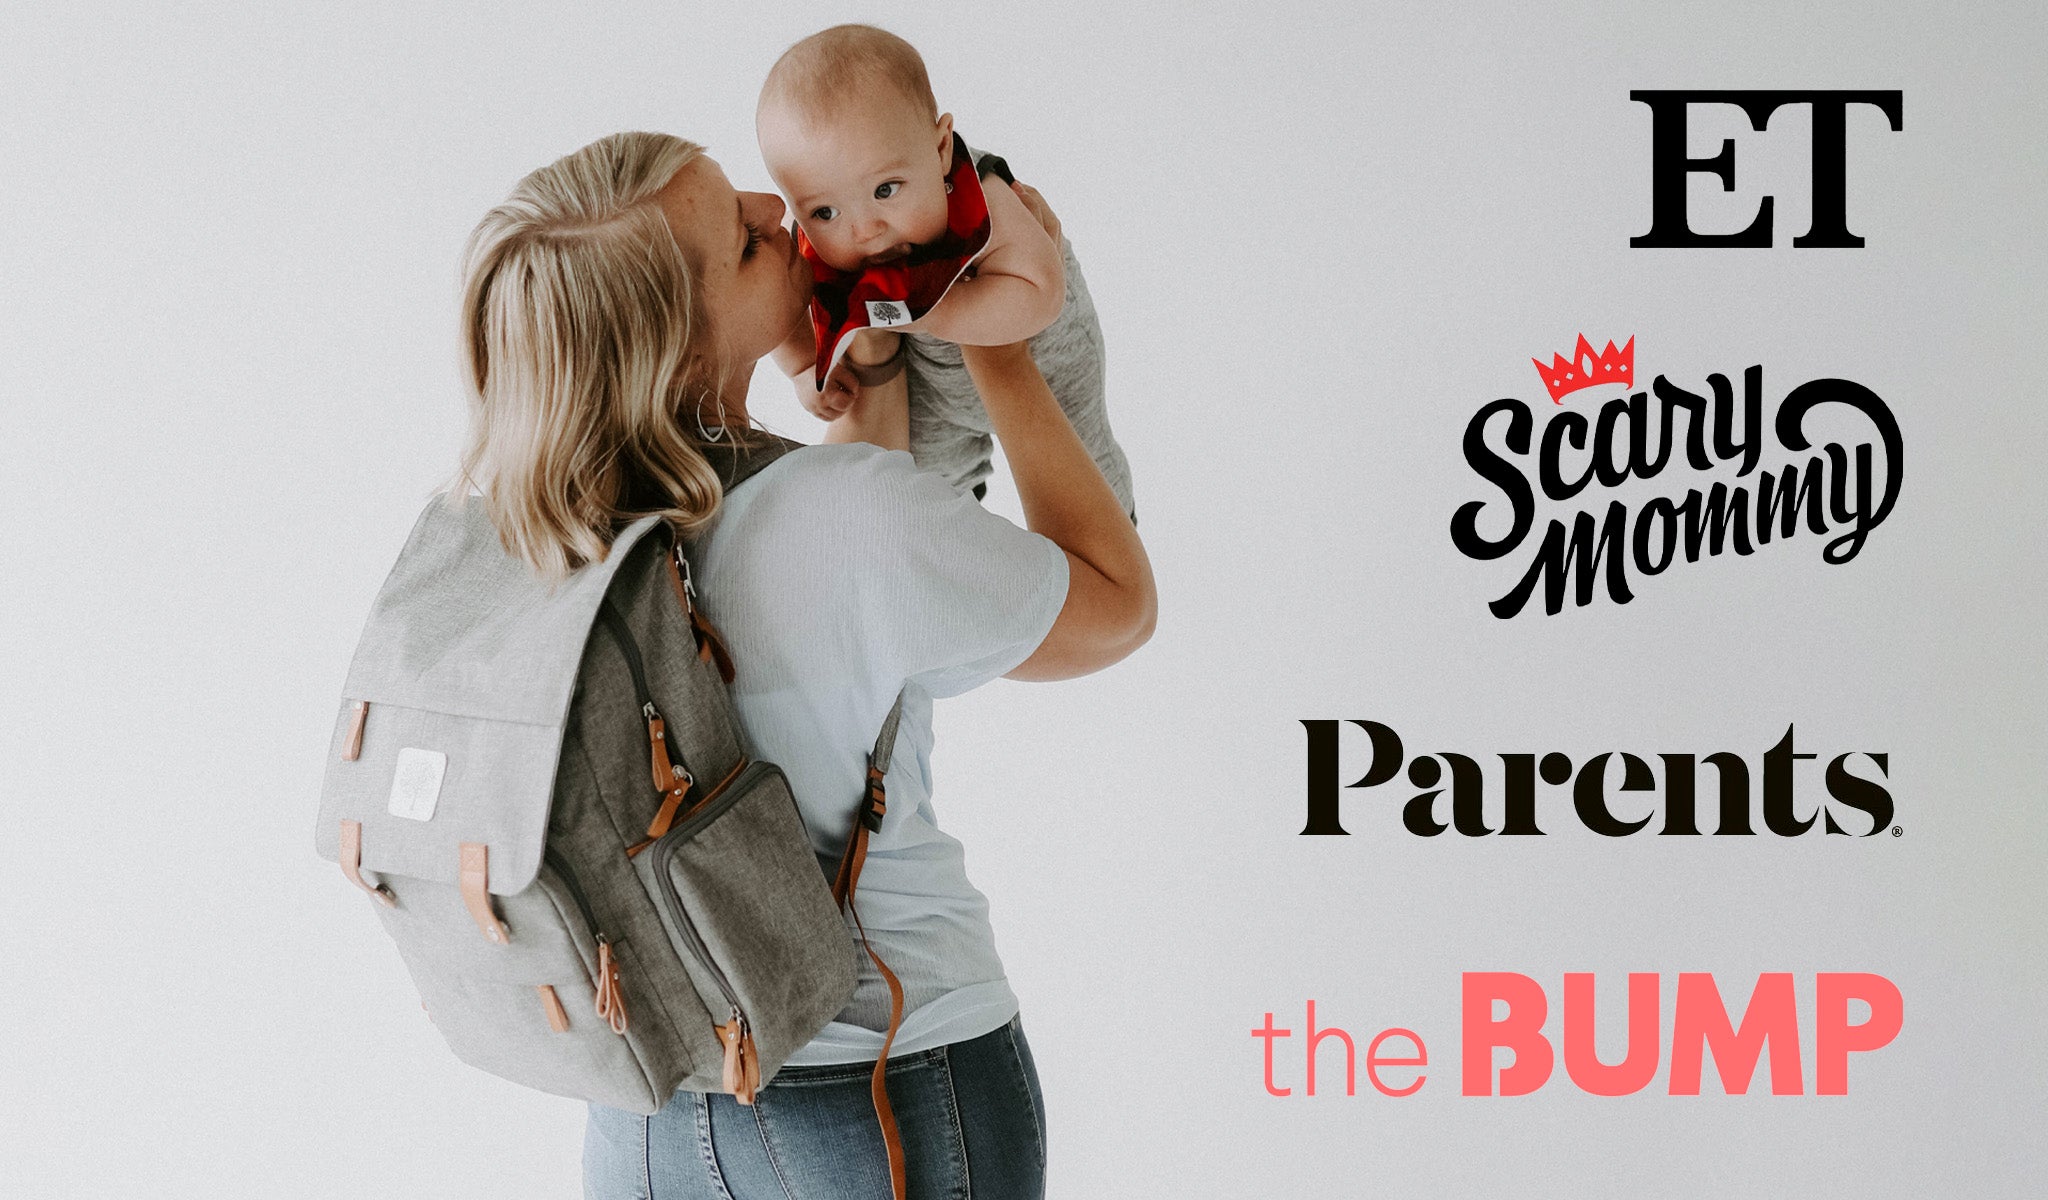 Parker Baby Co. Featured in ET, Scary Mommy, Parents, and The Bump